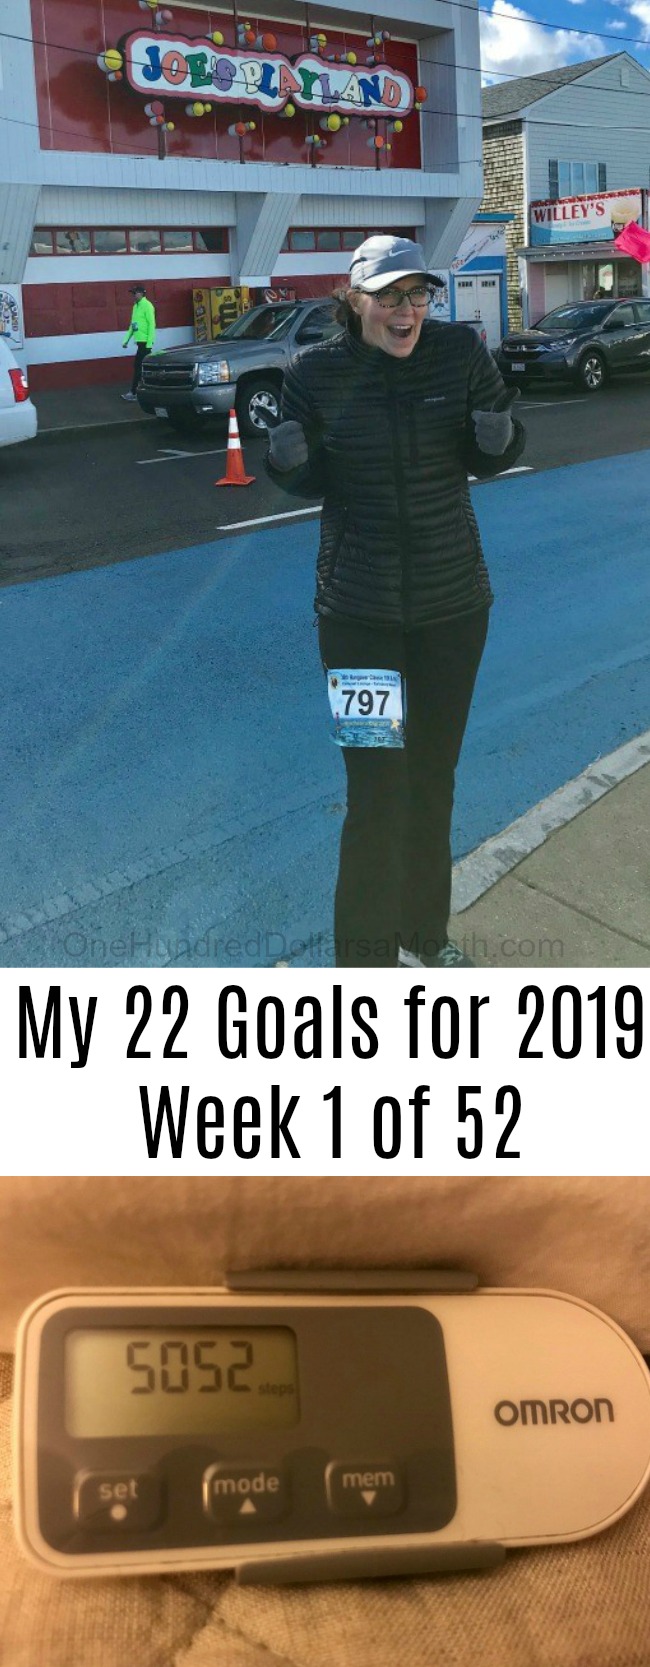 My 22 Goals for 2019 – Week 1 of 52